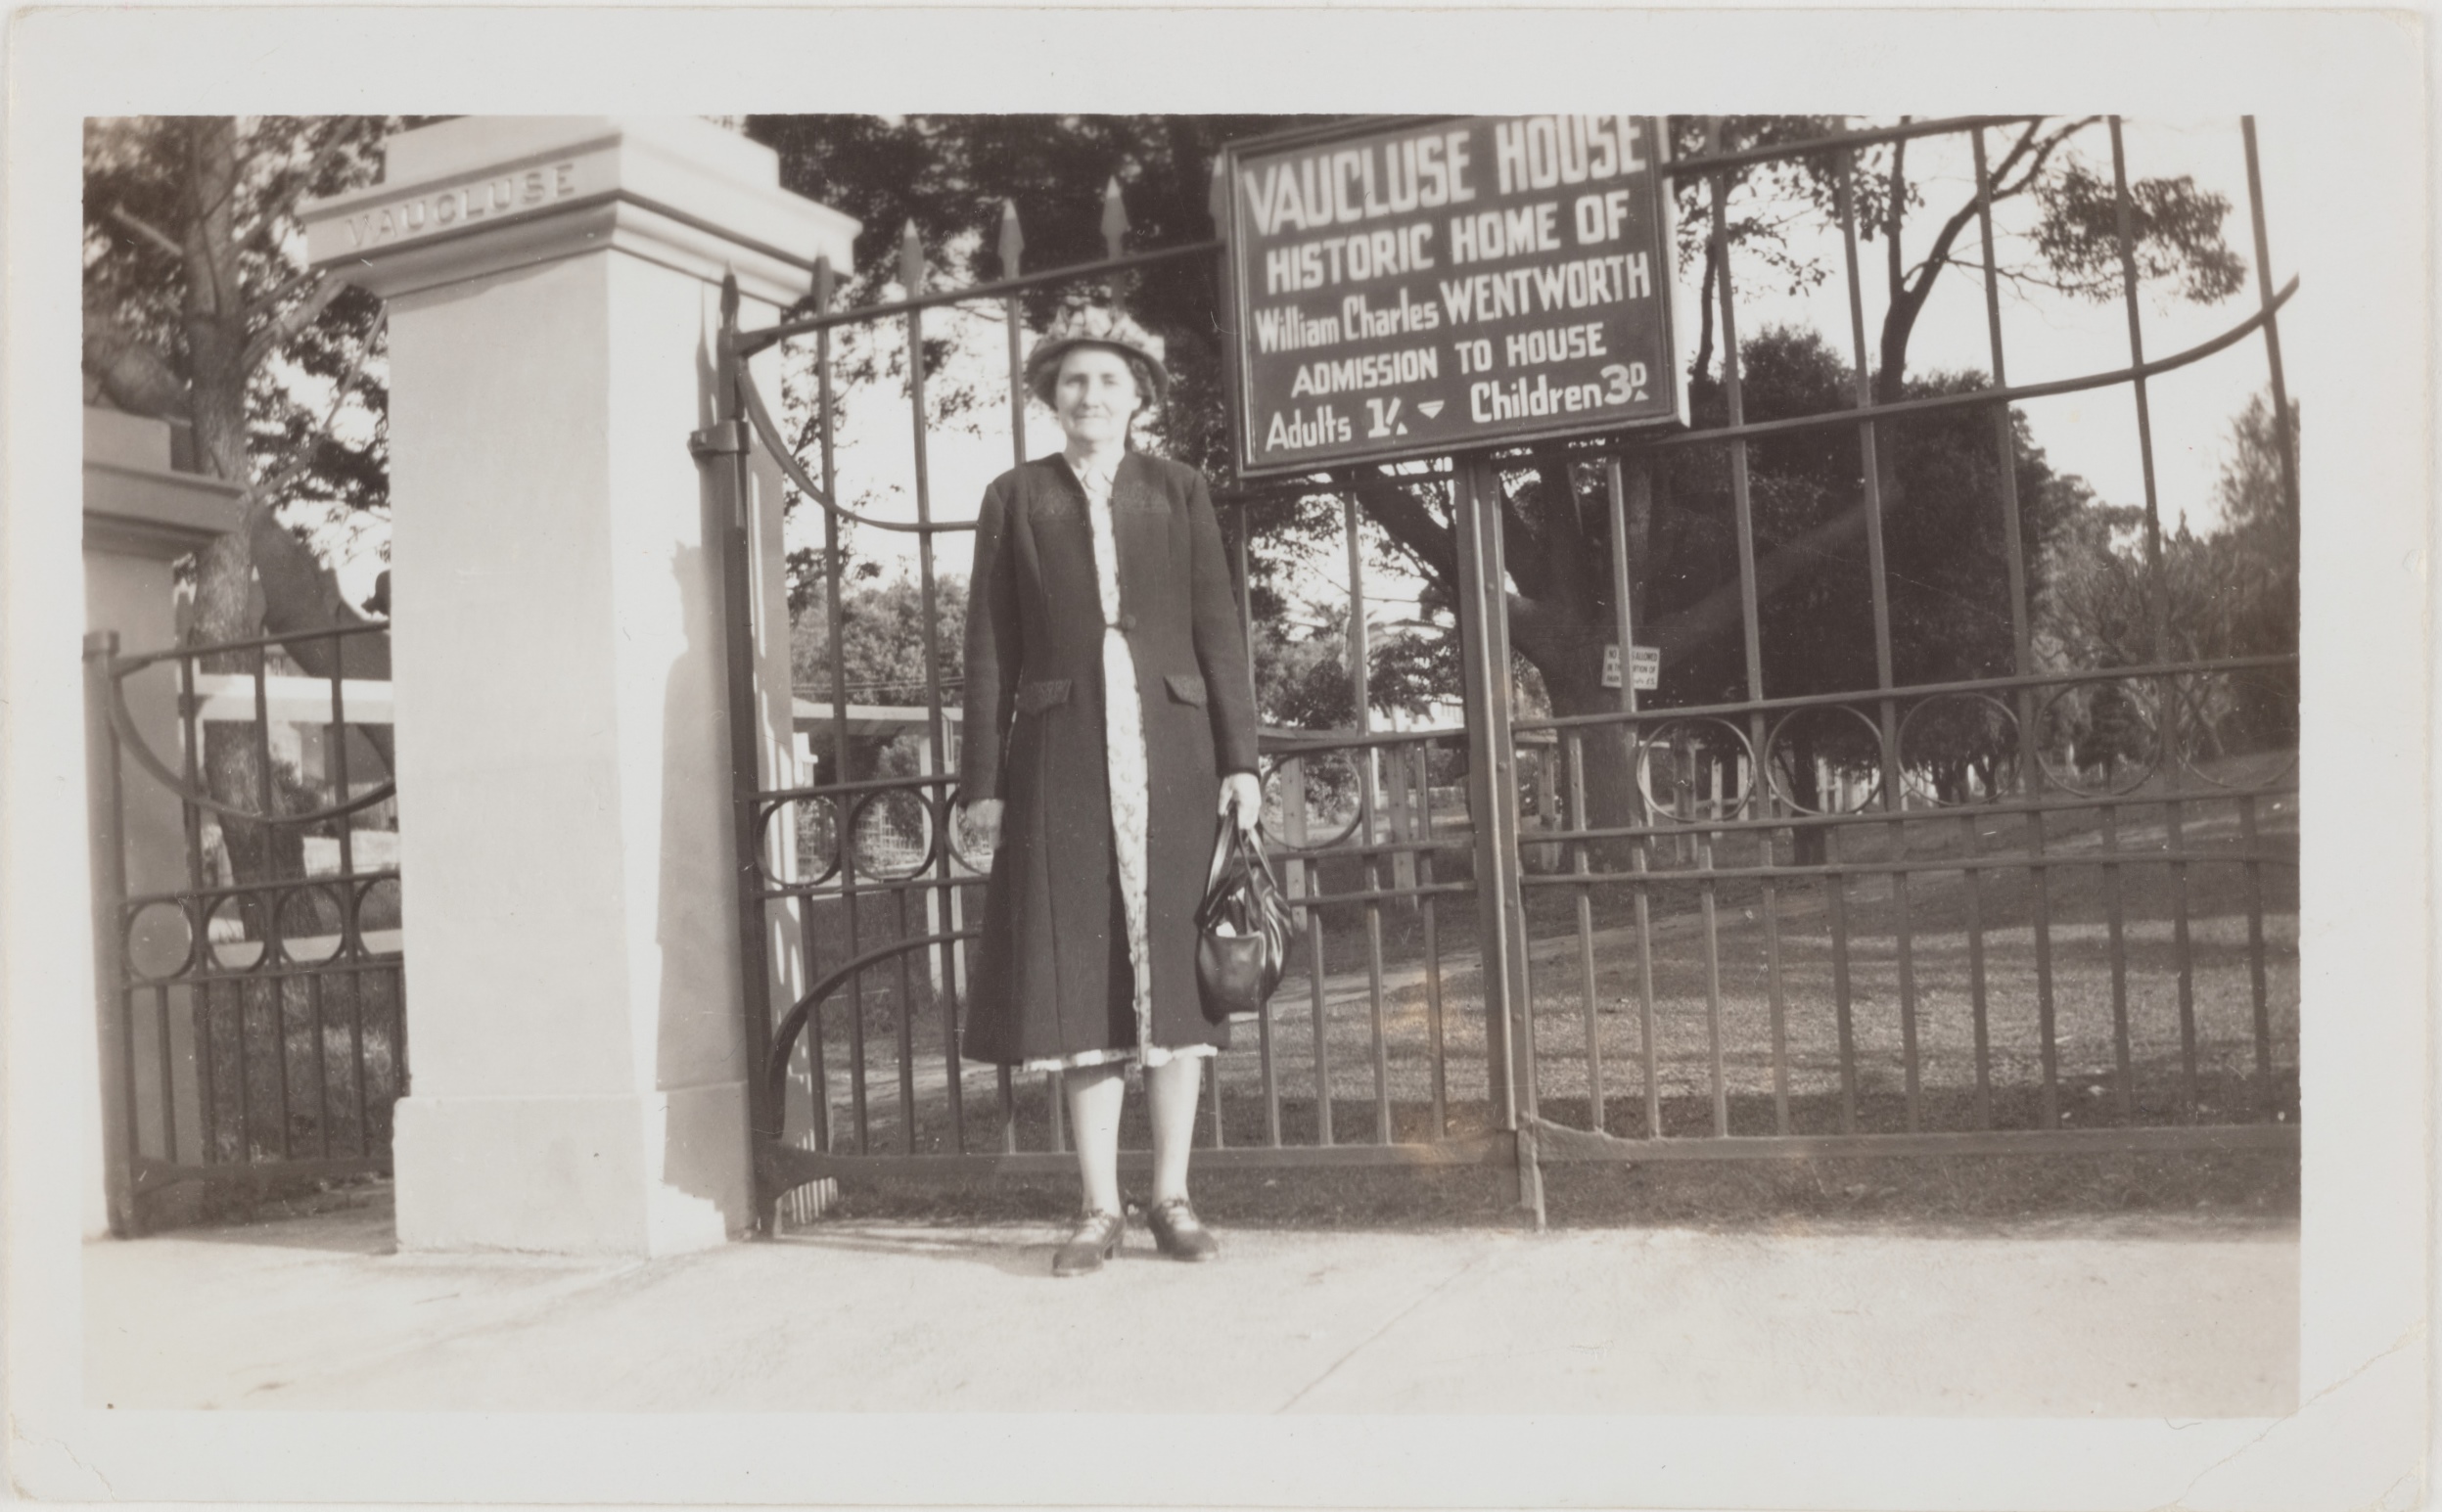 Visitor at the entrance gates to Vaucluse House, around 1925 / photographer unknown